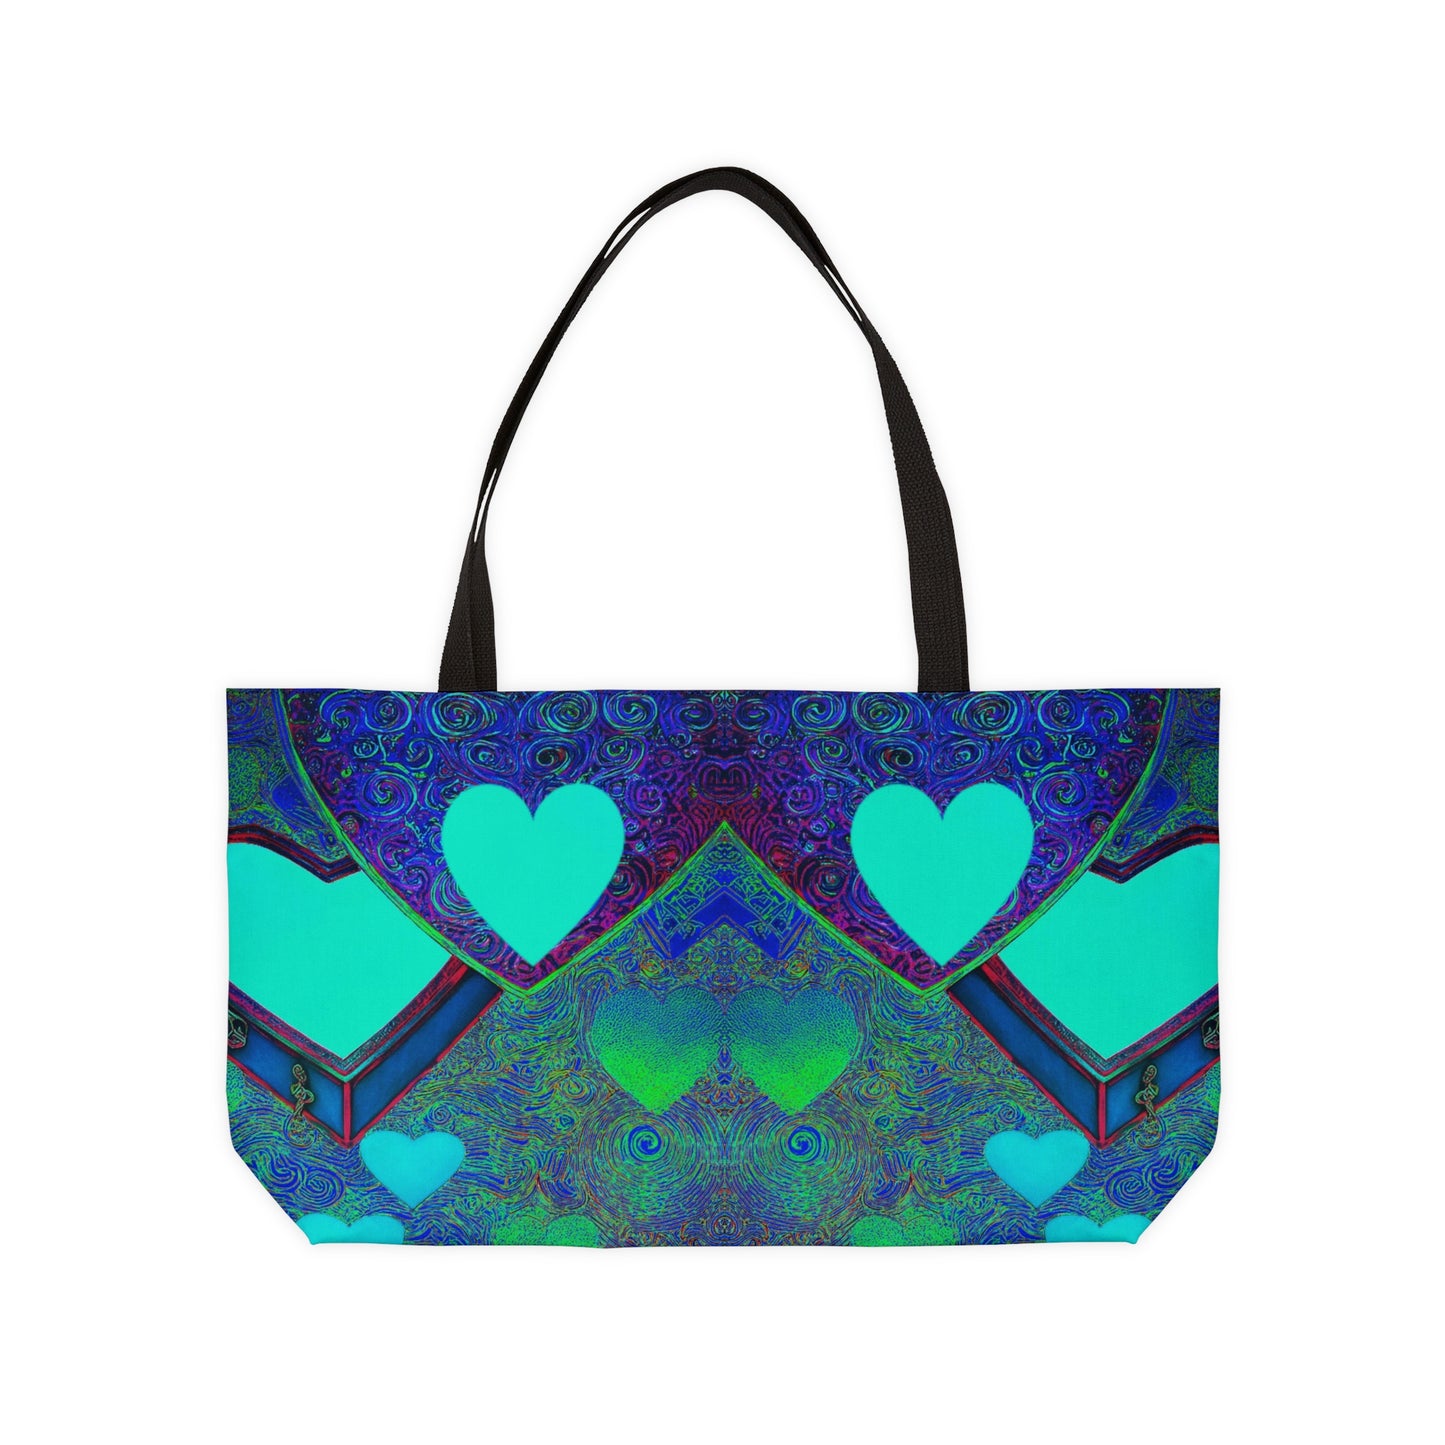 Weekender Tote Bag: BALEIJO Sea of Hearts Collection